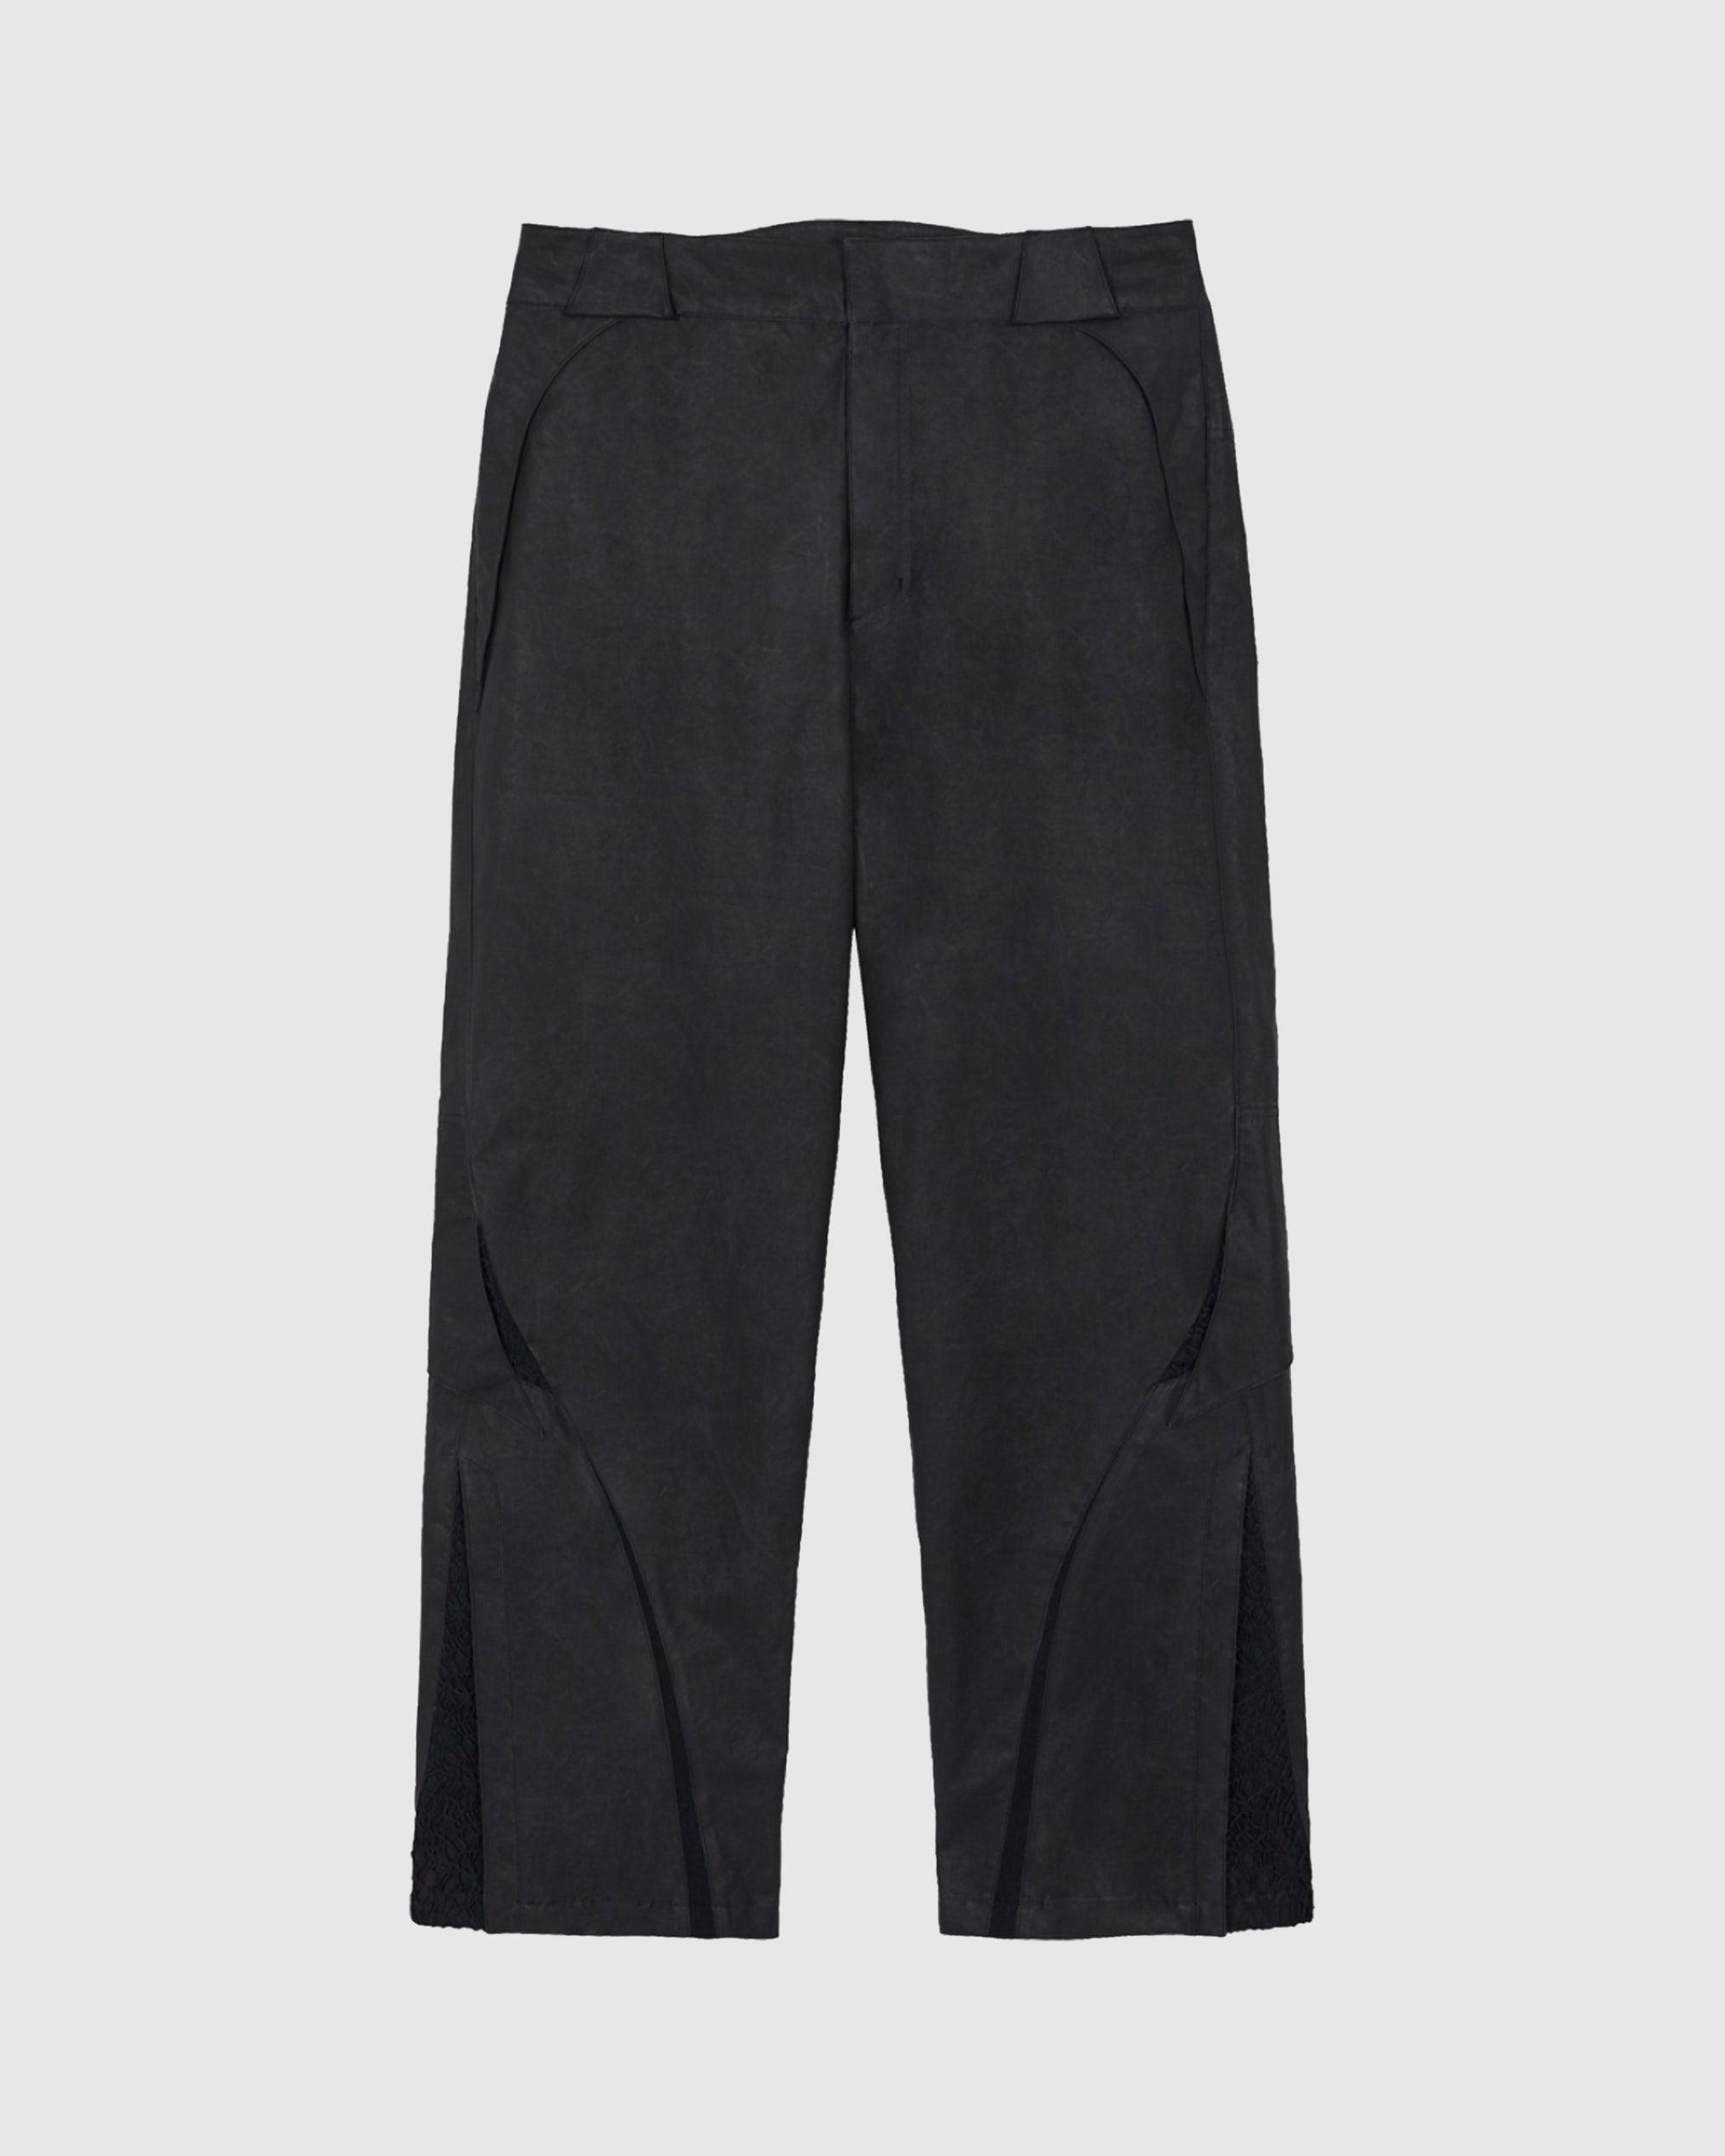 XLIM Black EP.3 01 Trousers – Chinatown Country Club